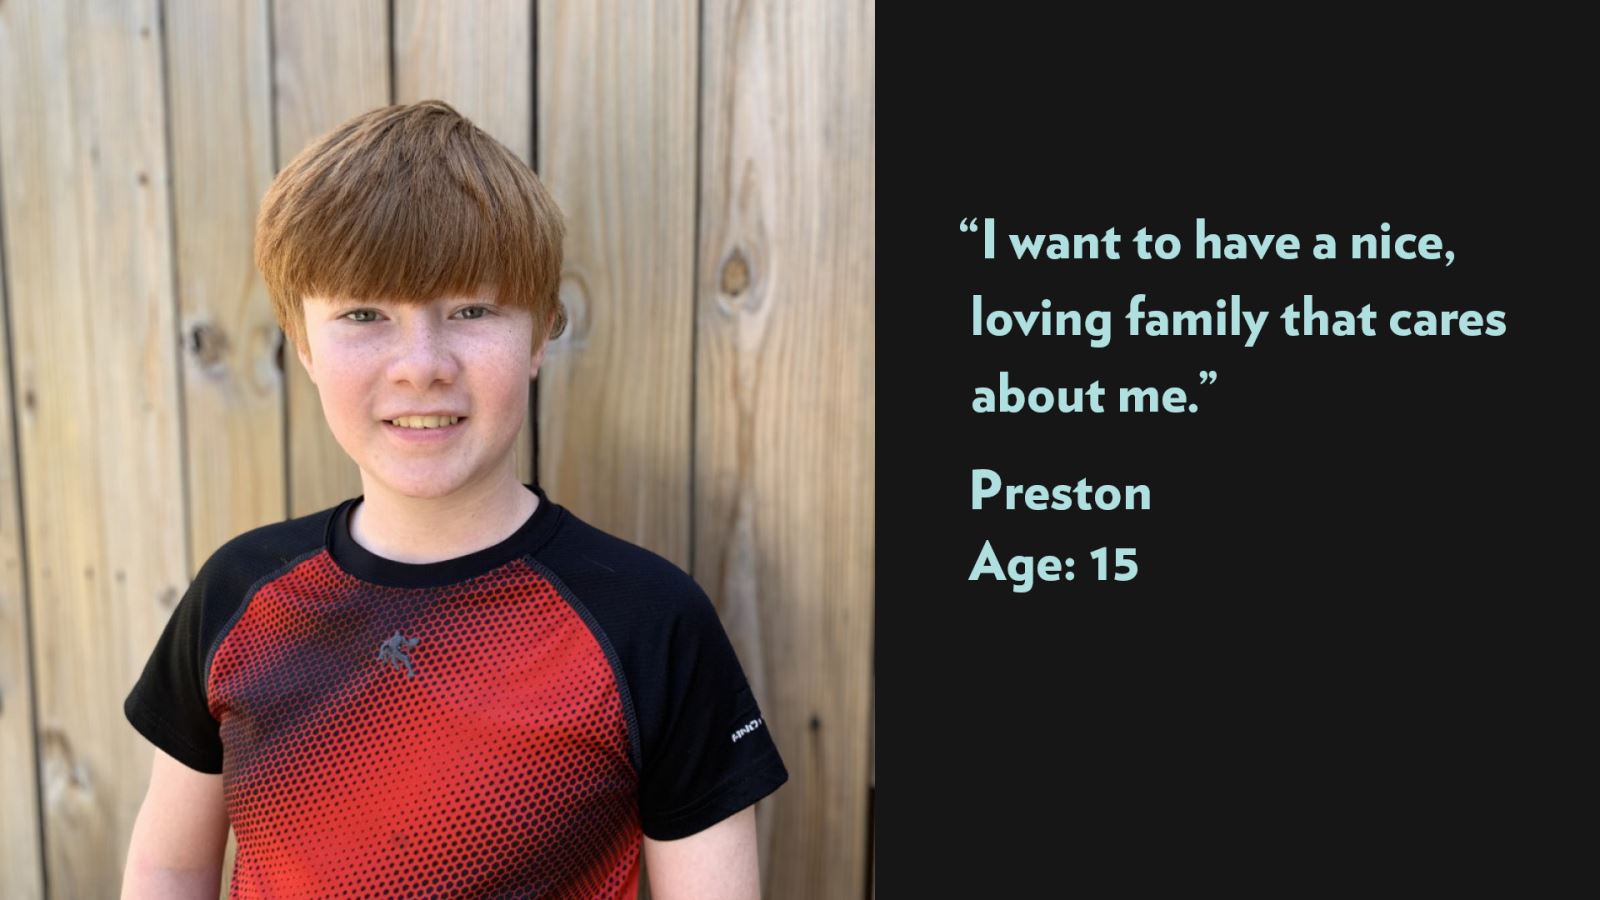 I want to have a nice, loving family that cares about me. Preston, age 15. View profile.